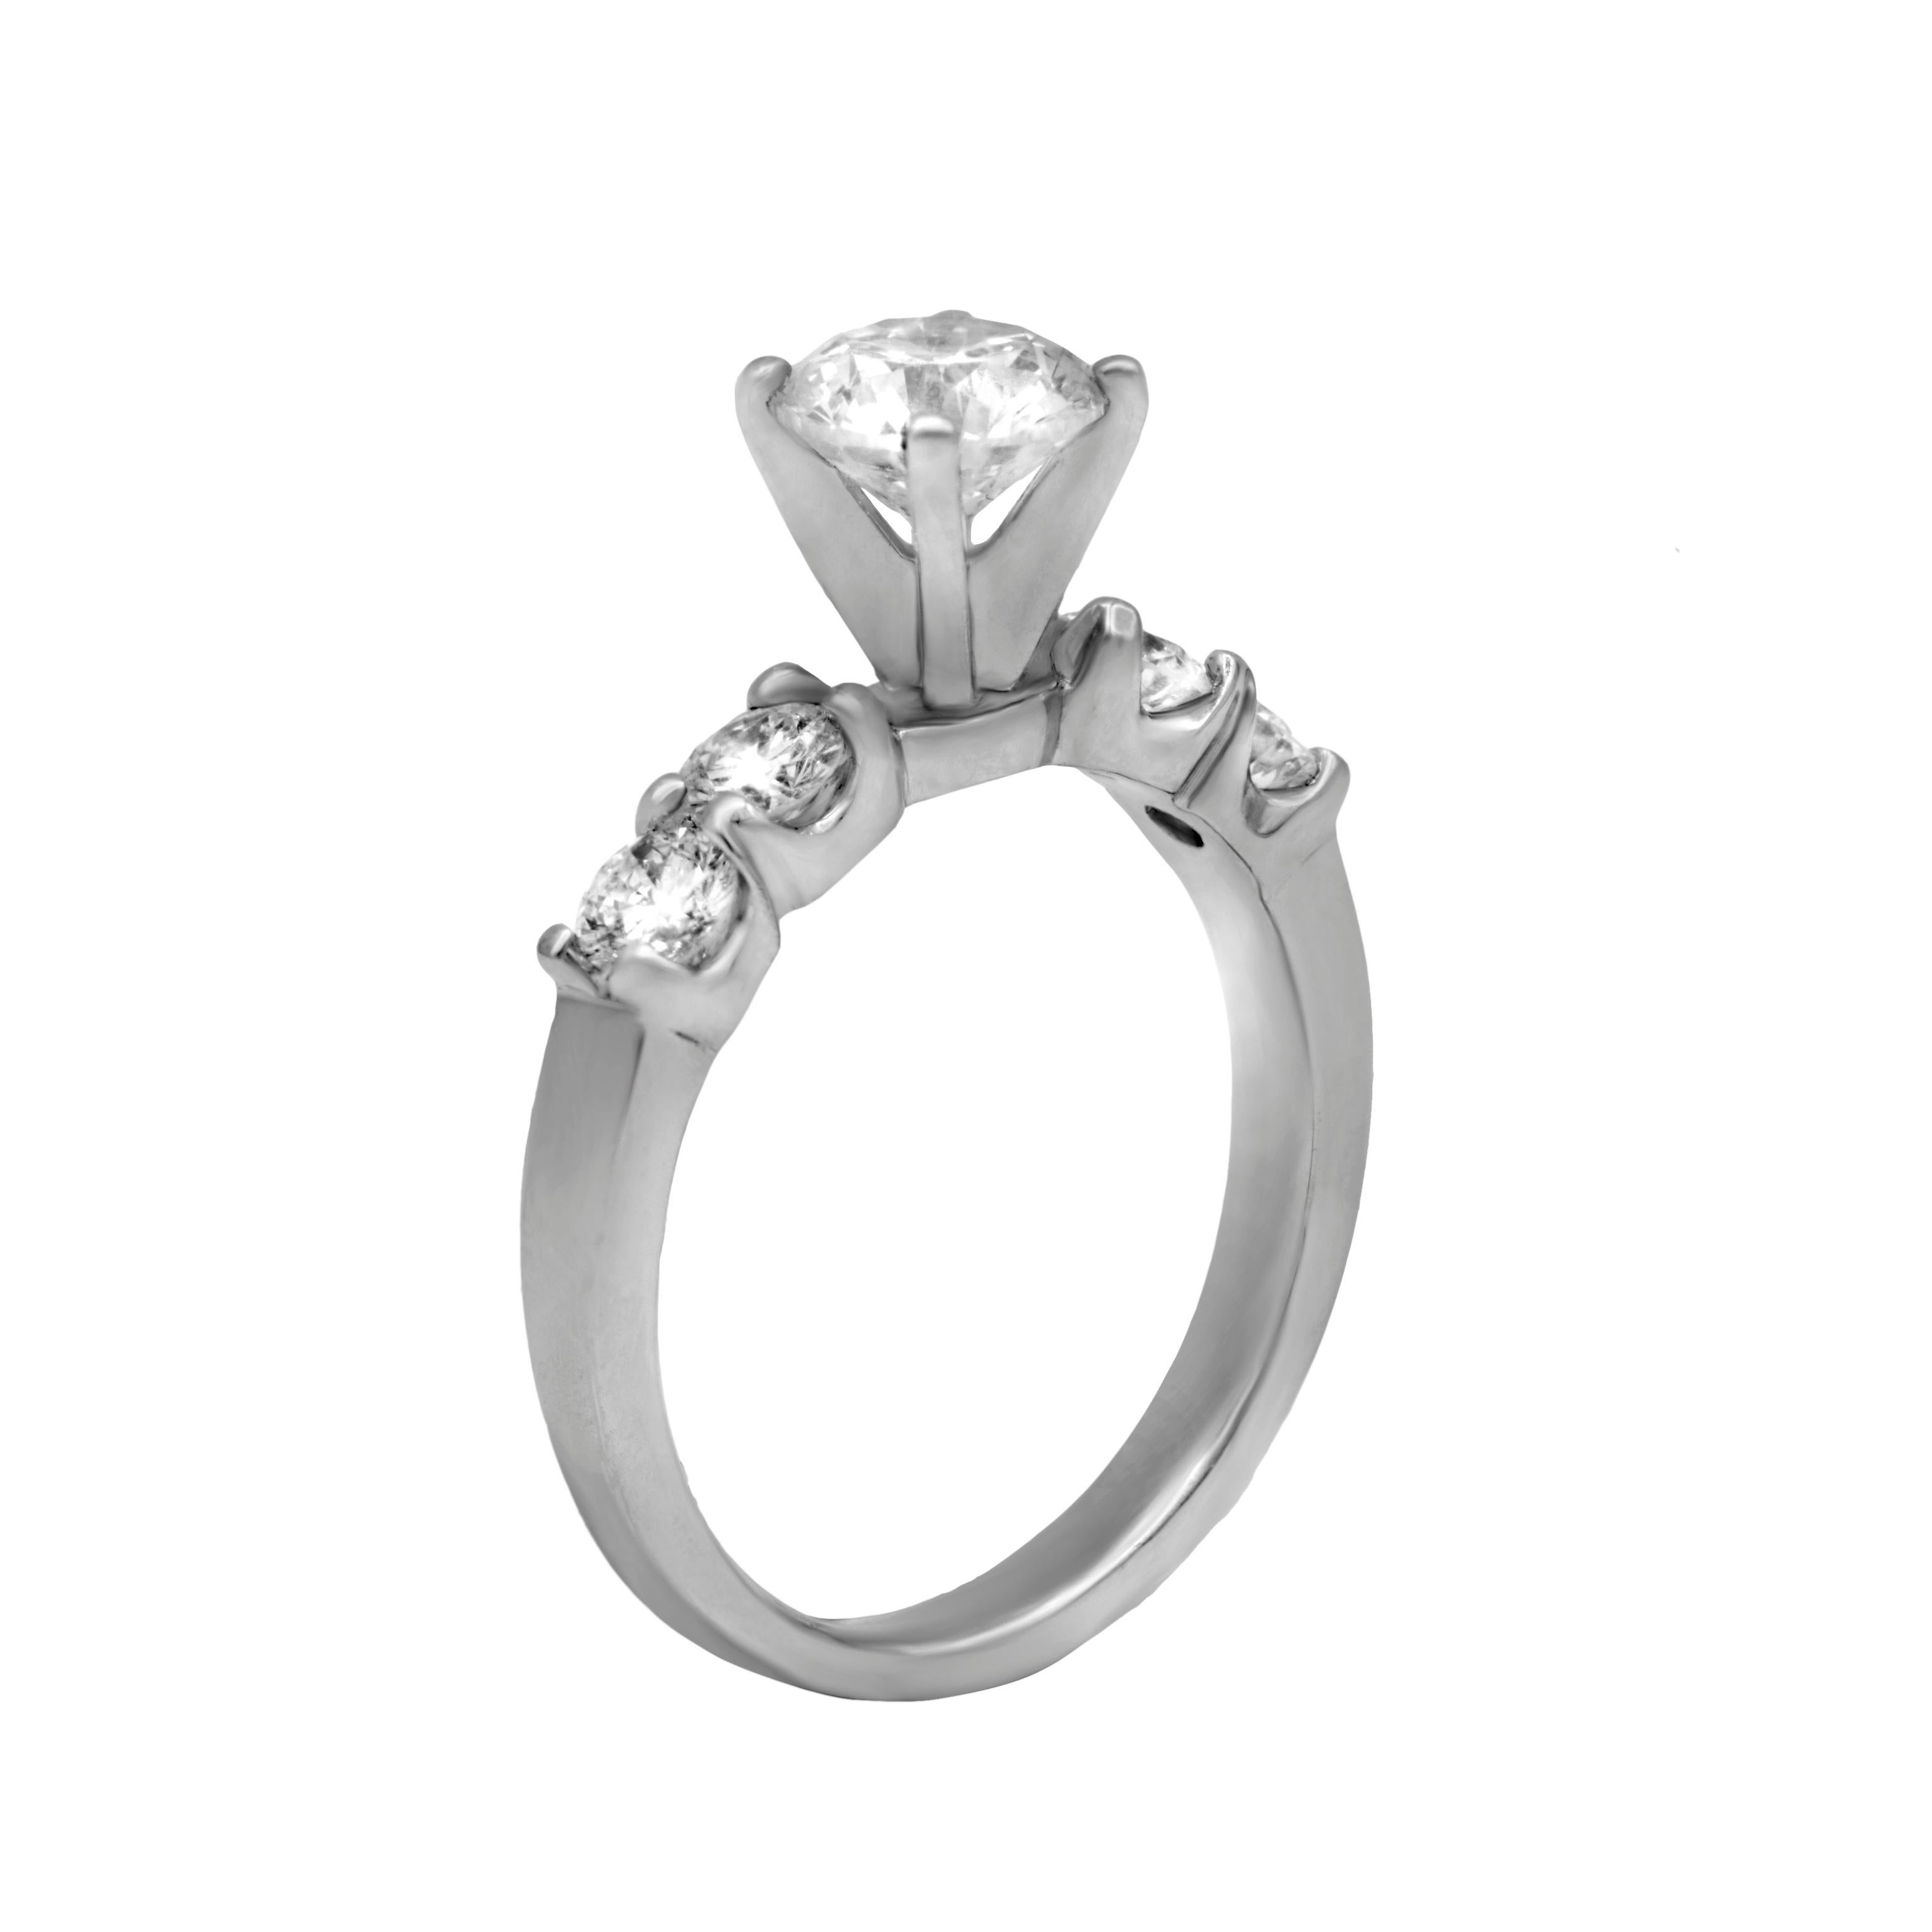 Plat engagement ring, feature 1.01ct round diamond with .55cts of diamonds in a setting.
